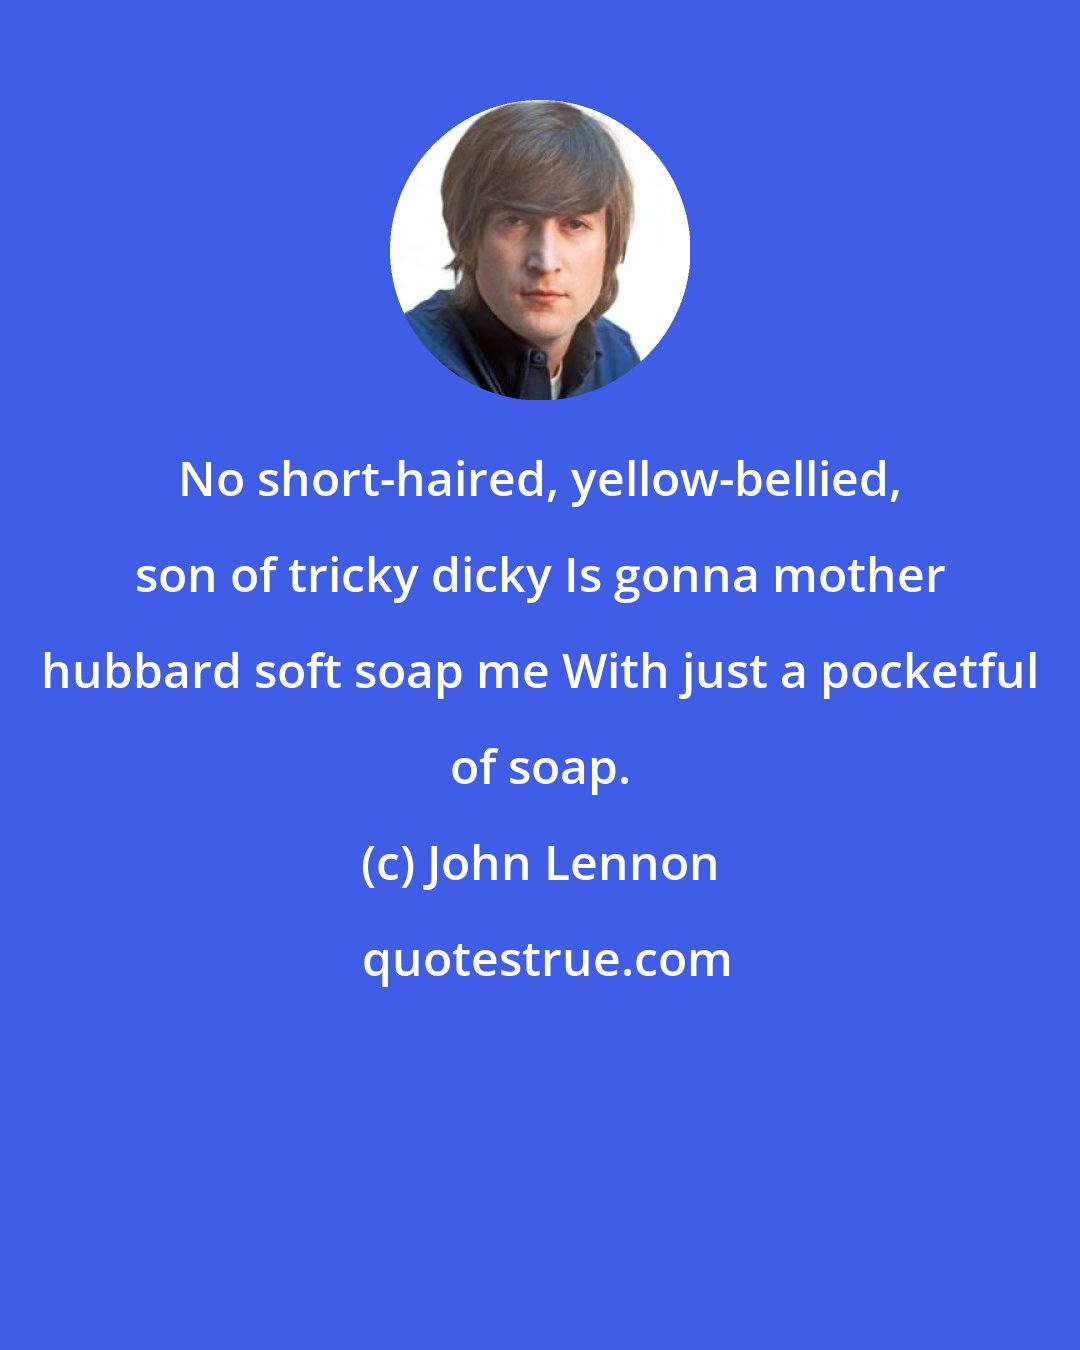 John Lennon: No short-haired, yellow-bellied, son of tricky dicky Is gonna mother hubbard soft soap me With just a pocketful of soap.